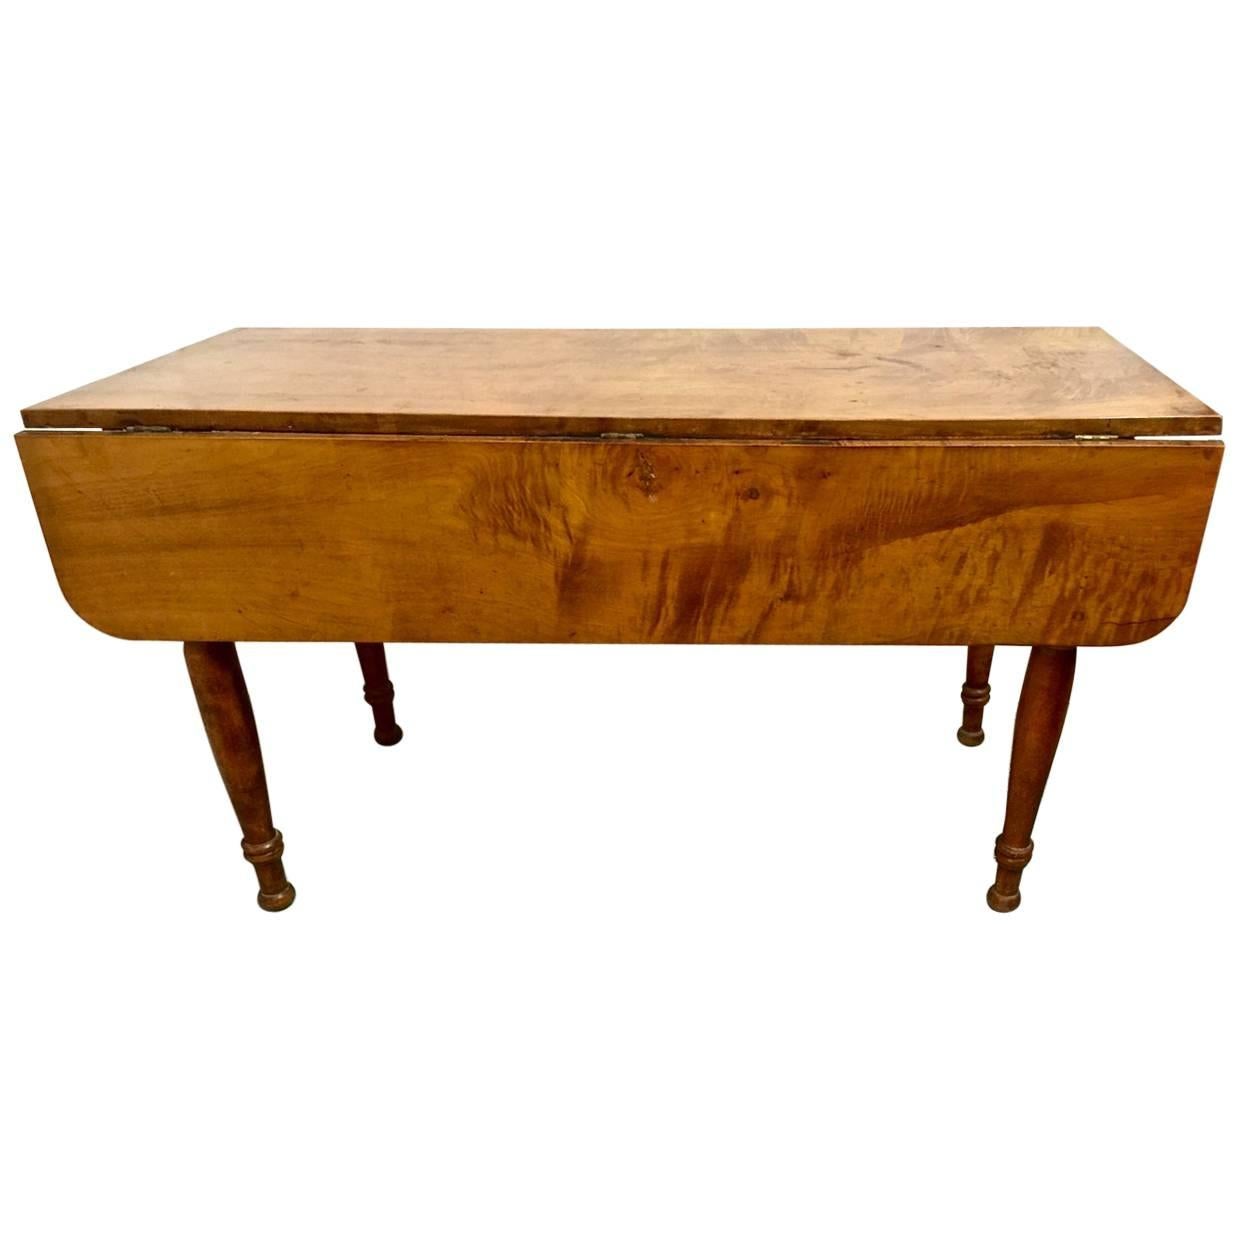 American Late Federal/Early Sheraton Drop-Leaf Child's Table, circa 1820